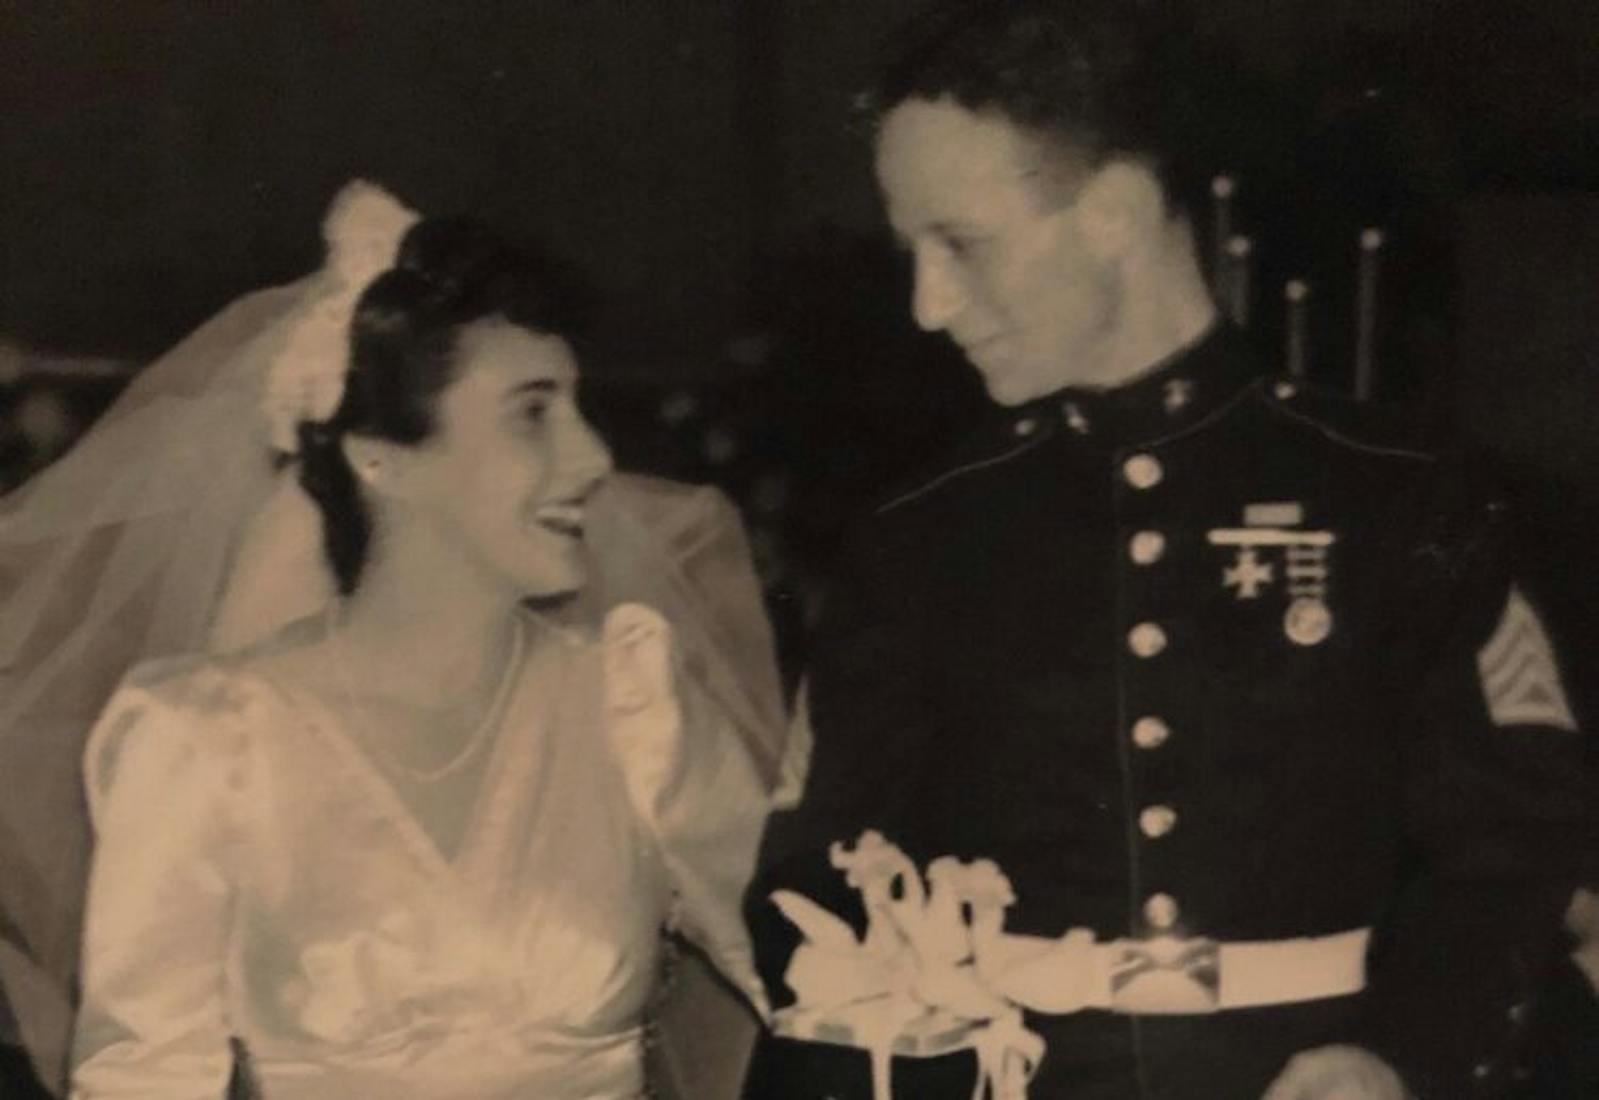 Lindsay’s grandparents on their wedding day in 1942.